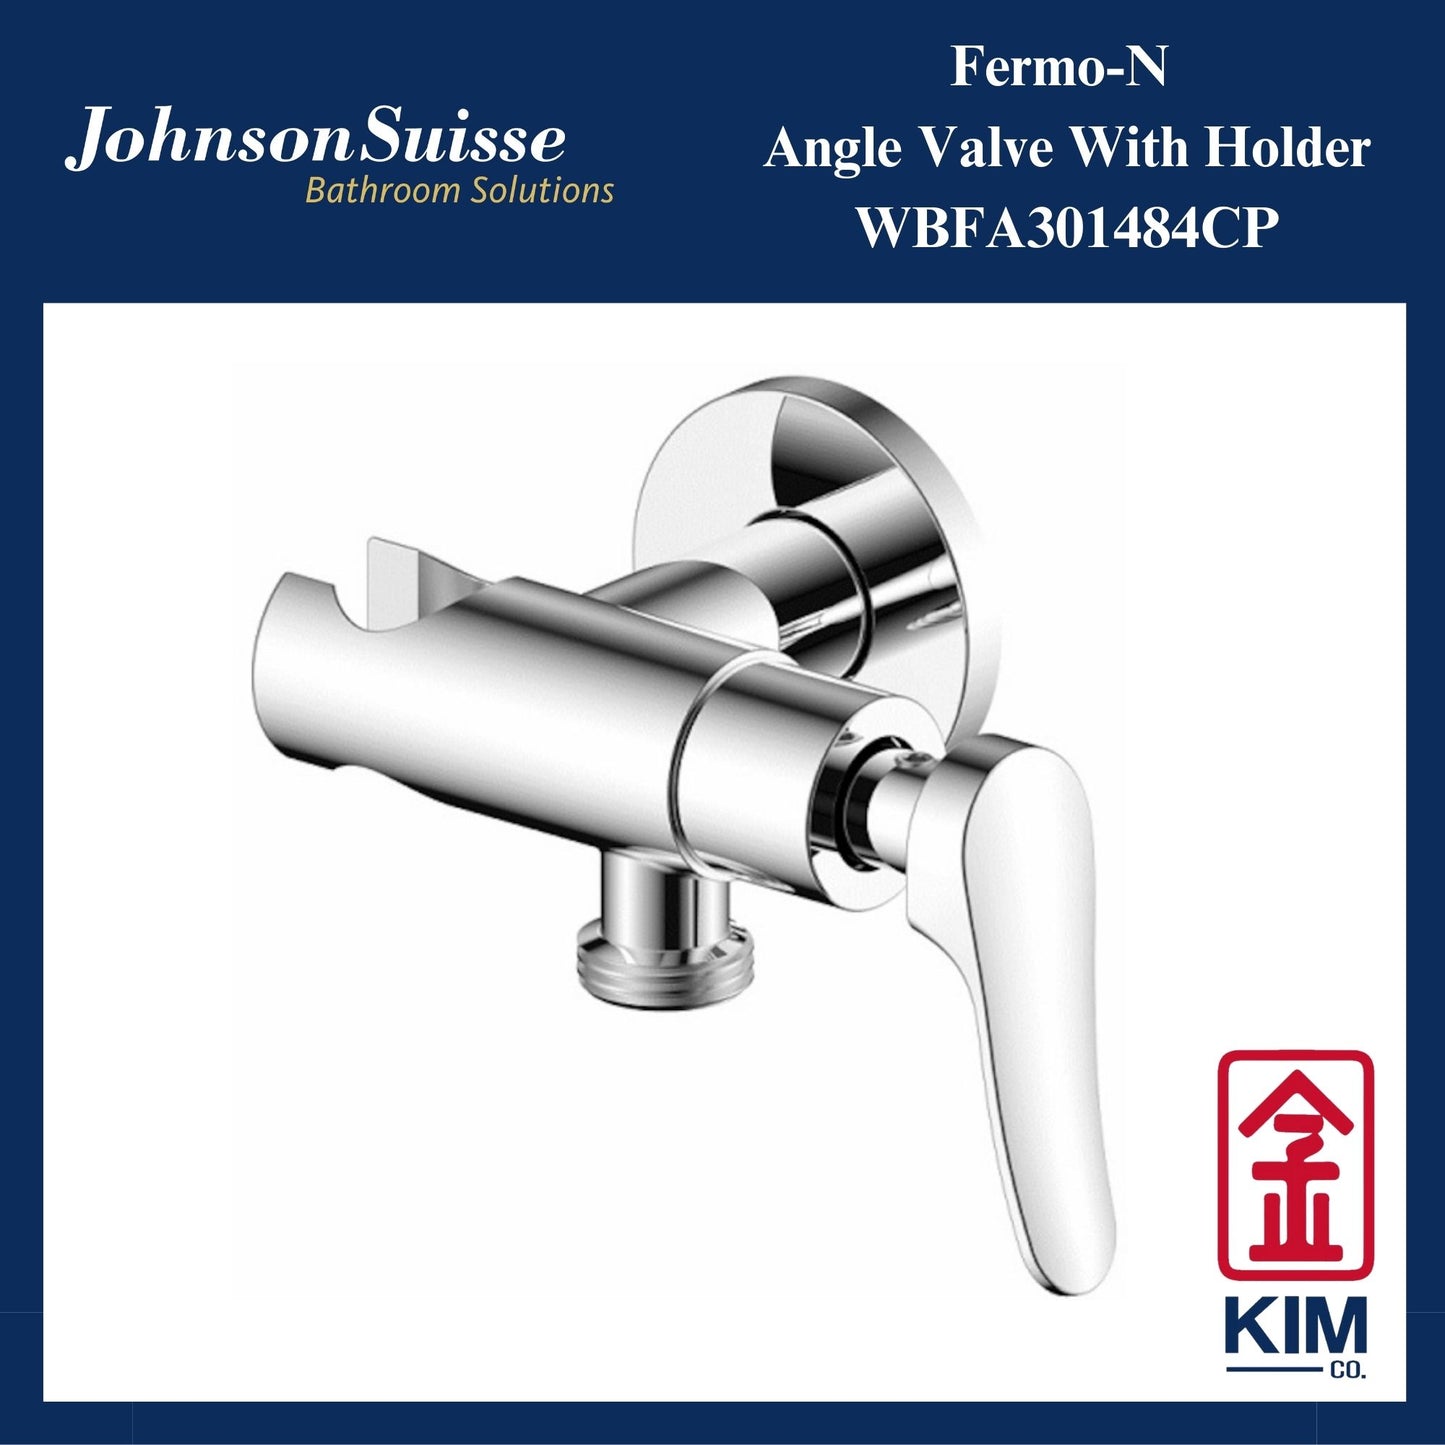 Johnson Suisse Fermo-N Angle Valve With Holder (WBFA301484CP)